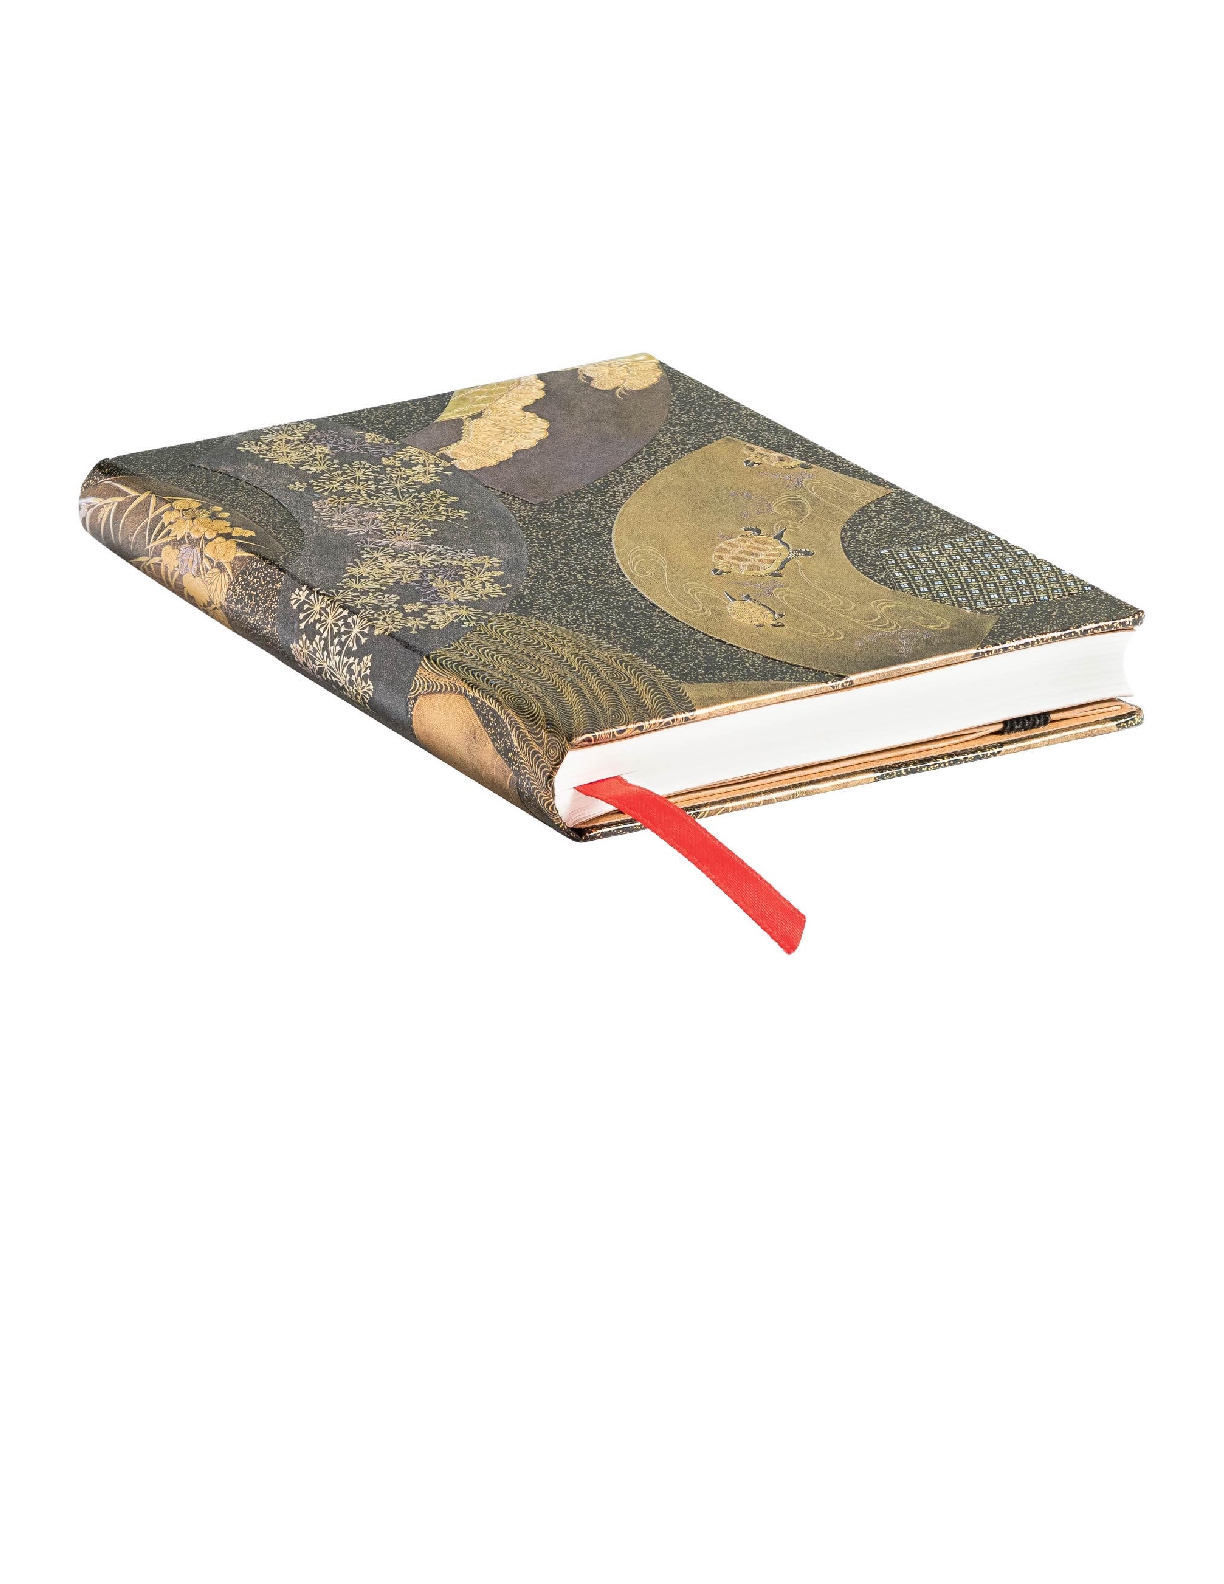 Ougi, Japanese Lacquer Boxes, Hardcover, Mini, Lined, Elastic Band Closure, 176 Pg, 85 GSM